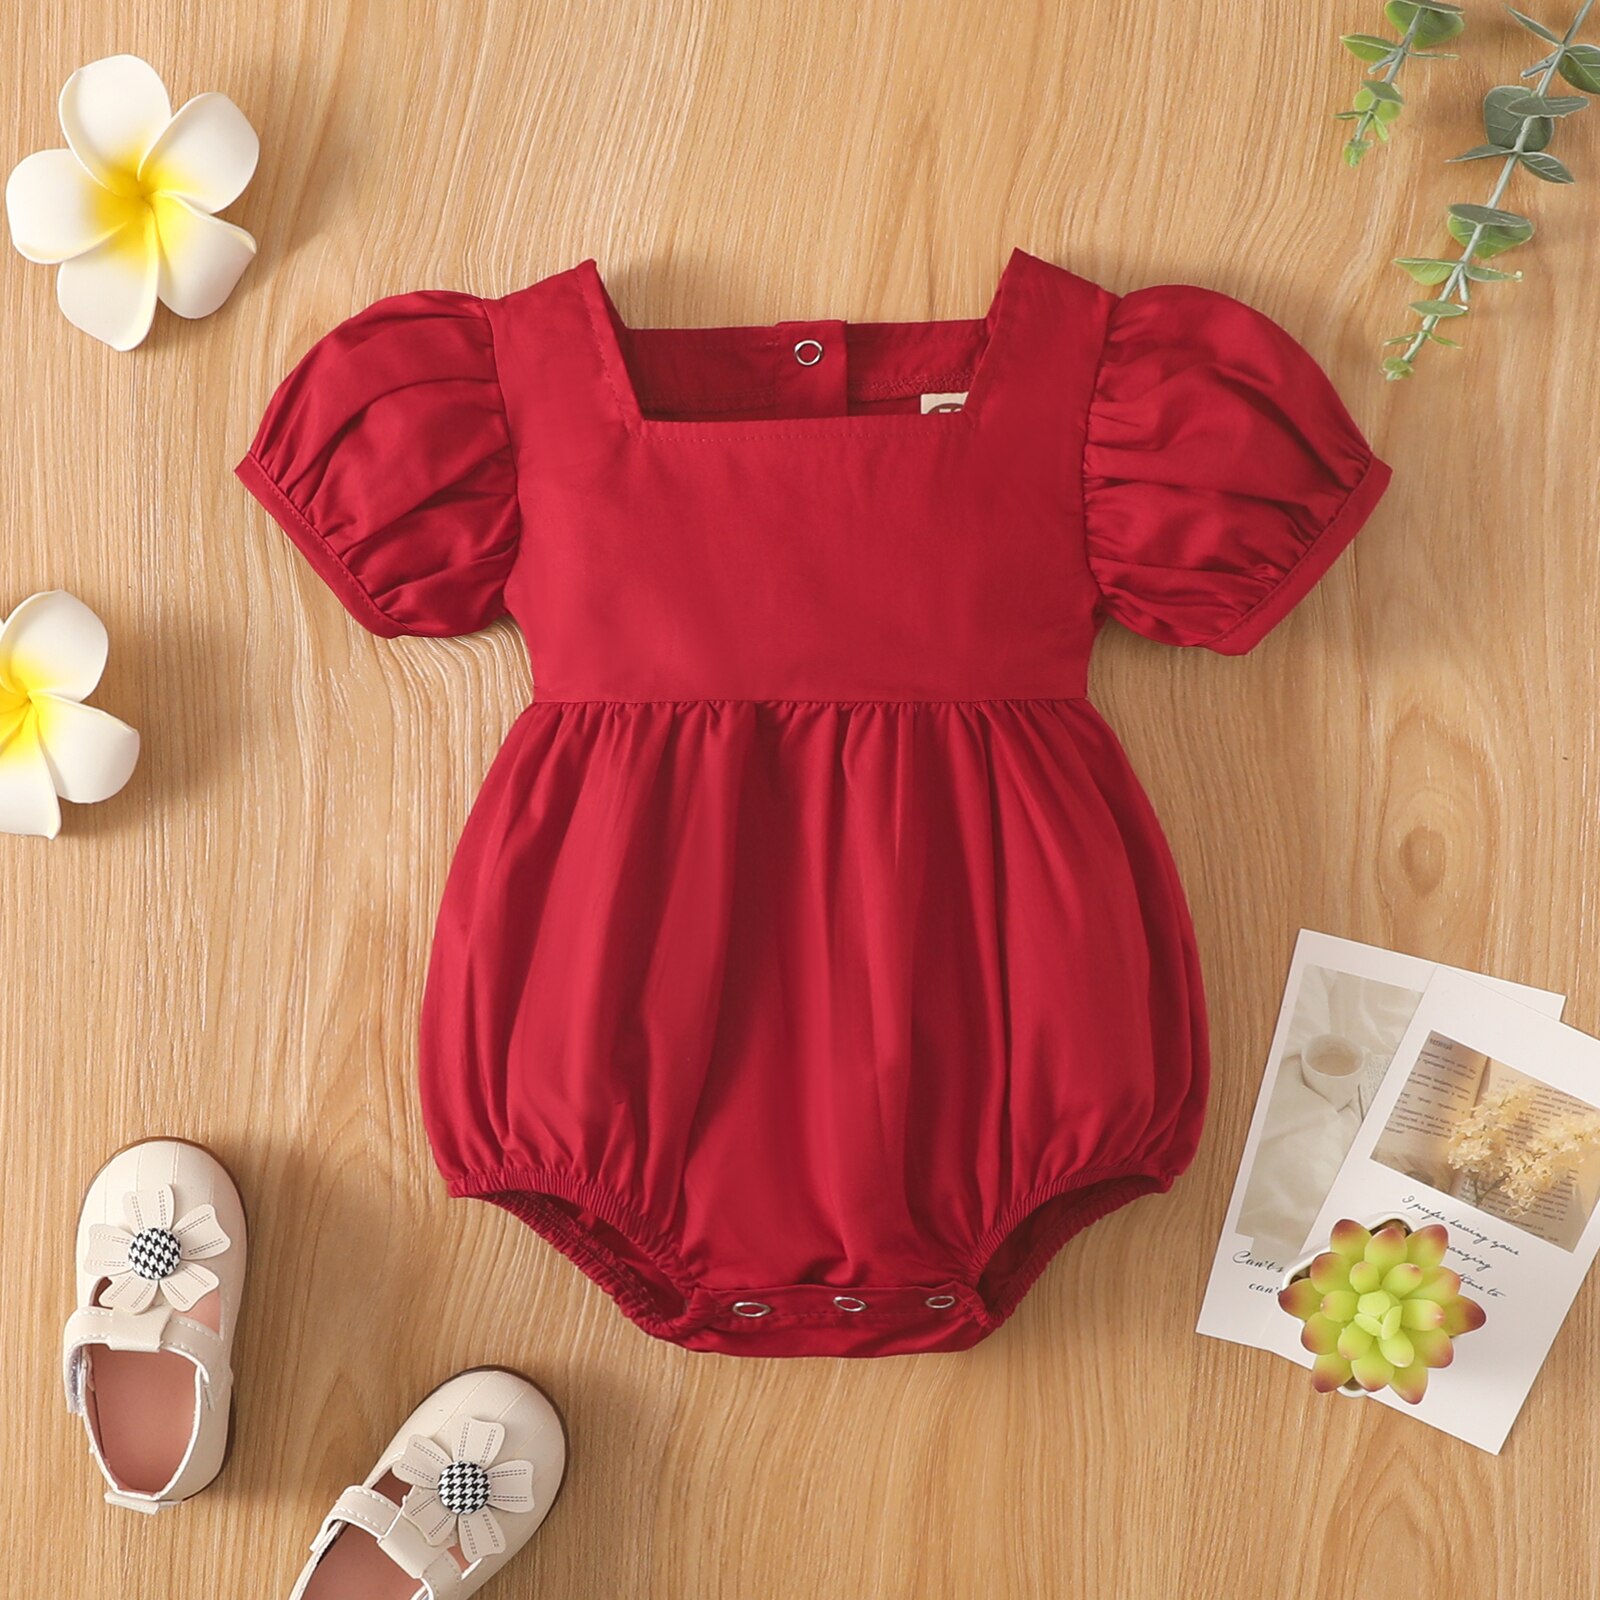 ma-baby-0-24M-Infant-Newborn-Baby-Romper-Summer-Puff-Sleeve-Jumpsuit-Playsuit-Cute-Toddler-Girls-3